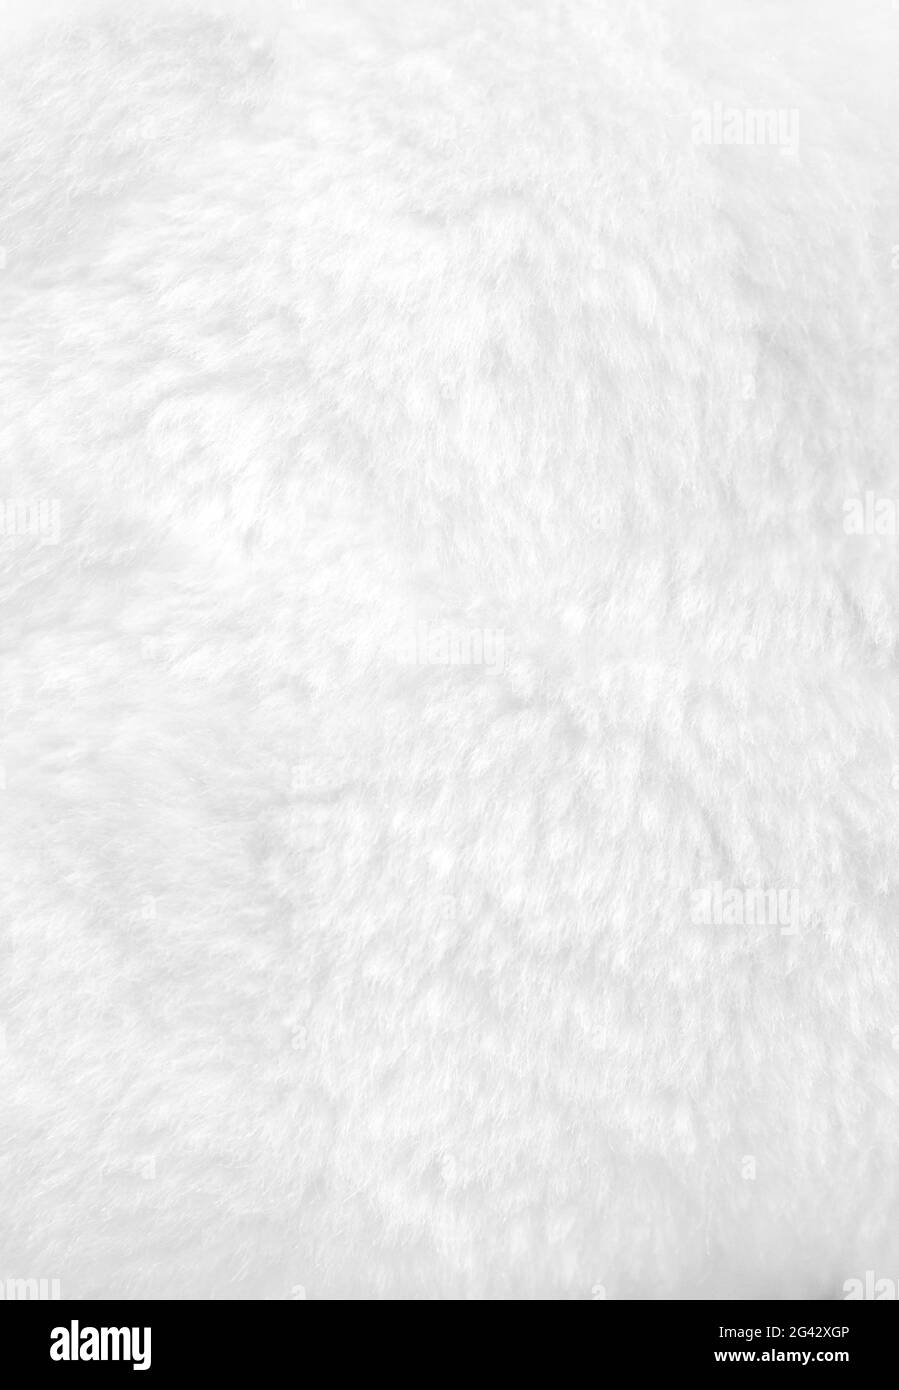 White fur background close up view. Stock Photo